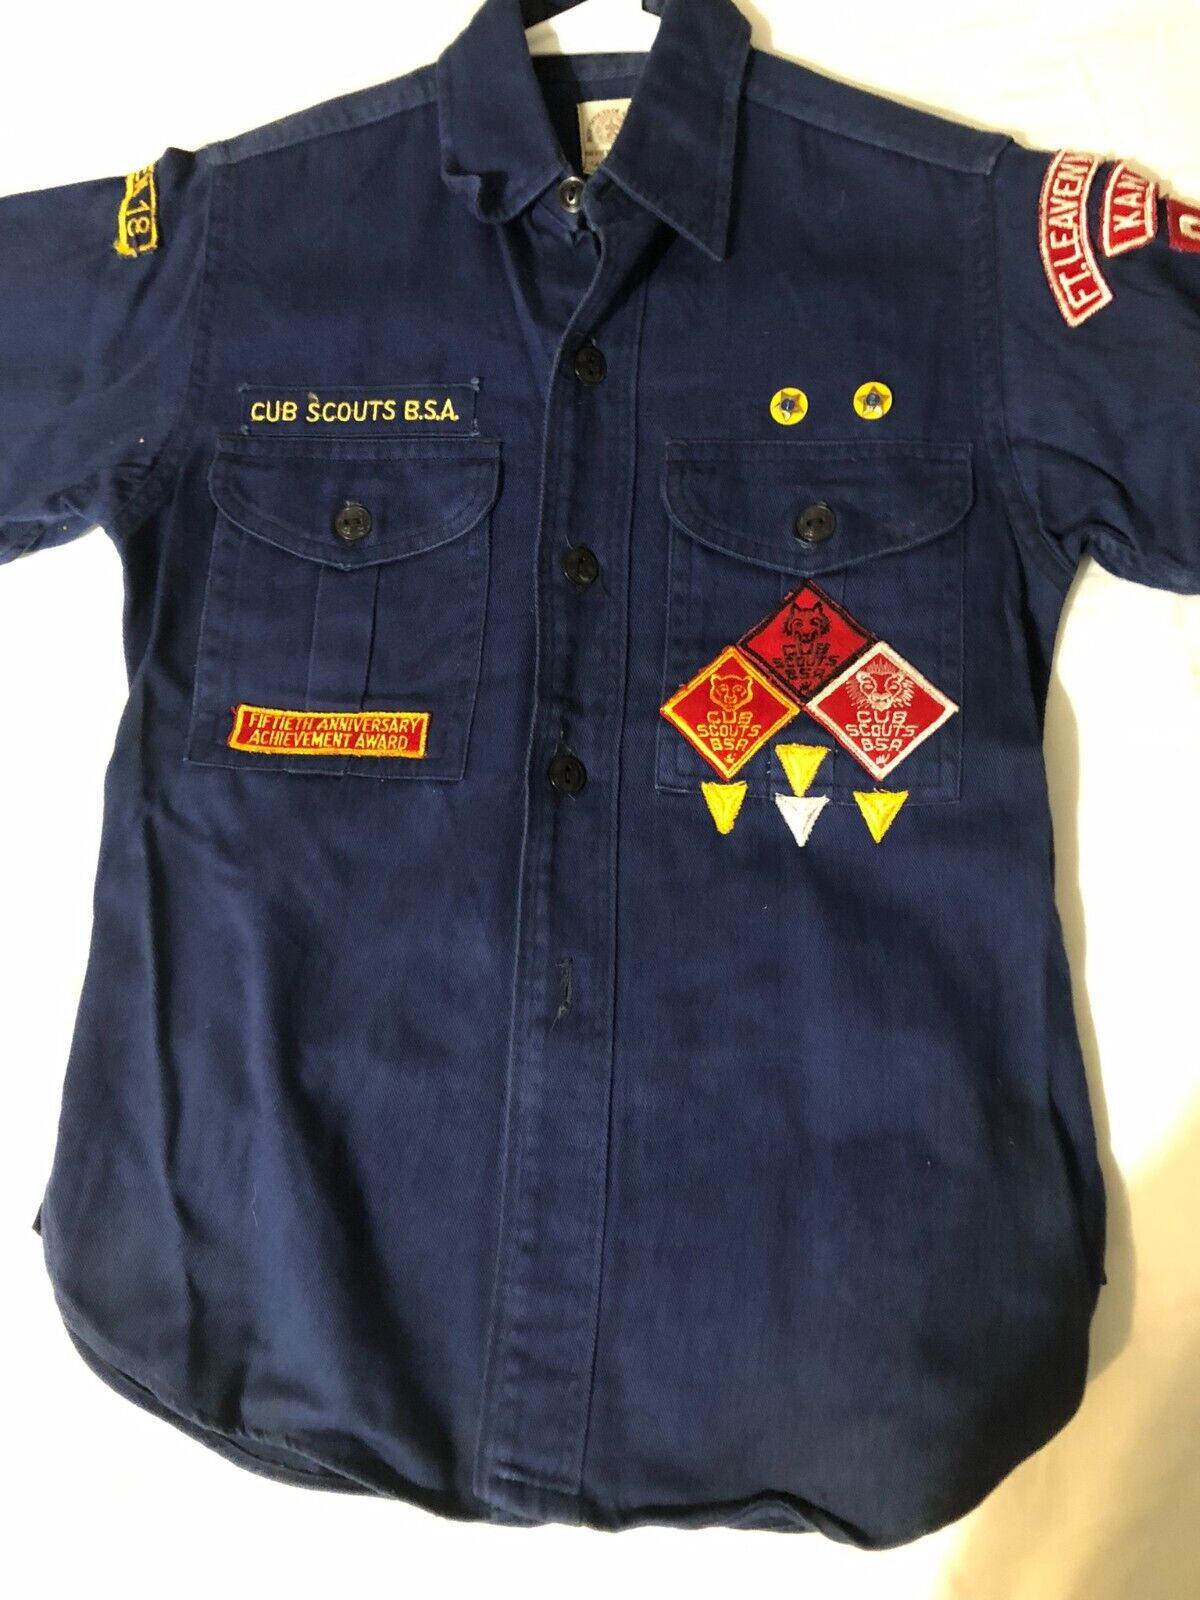 Vintage BSA Cub Scout Sanforized uniform 1960s long sleeve maybe size 12 or less